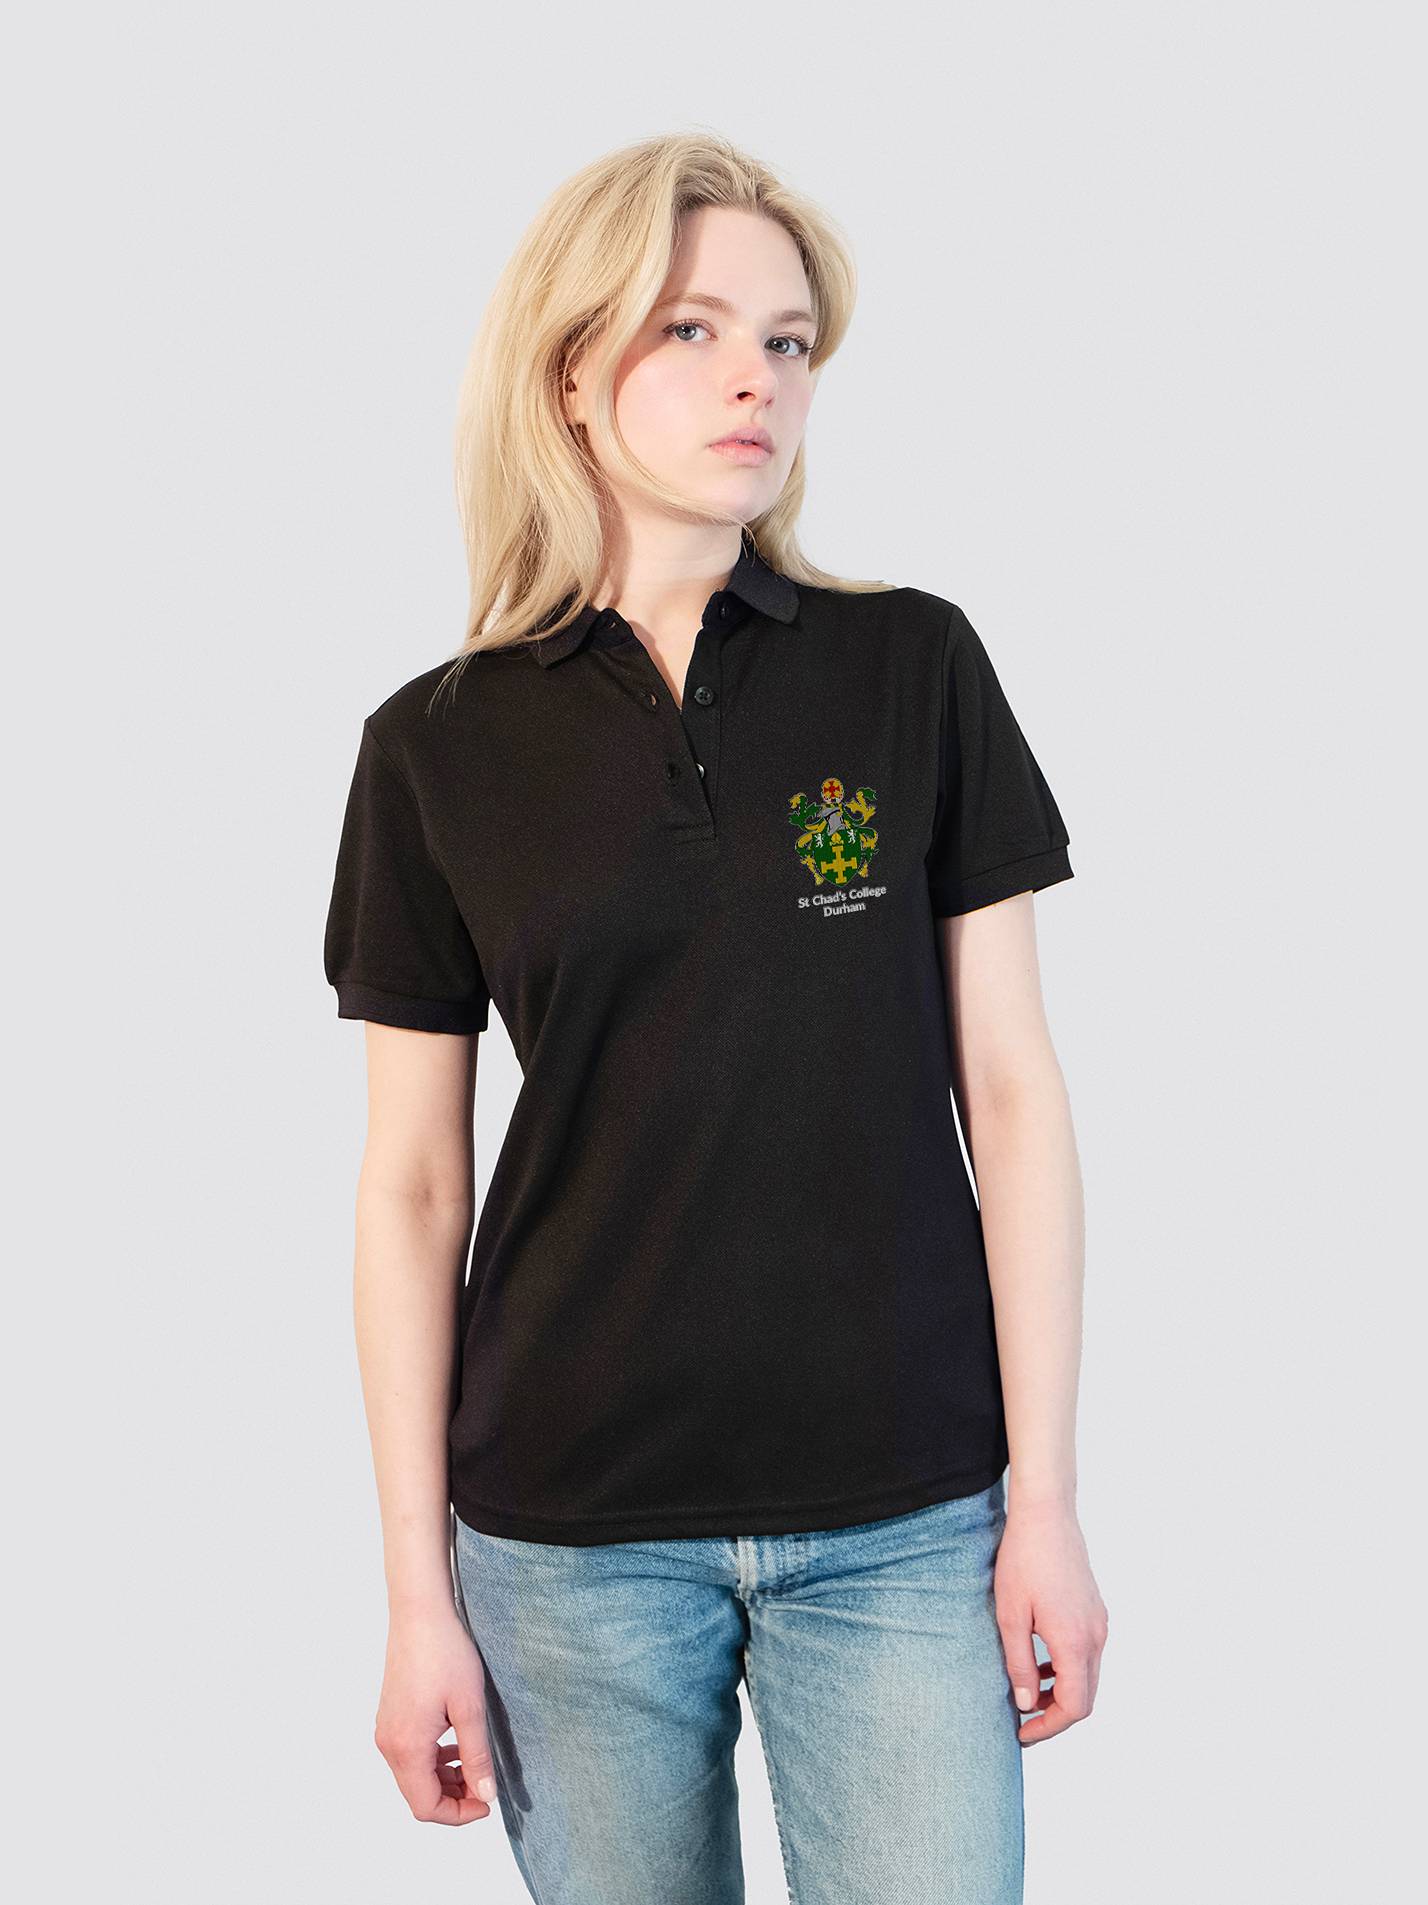 St Chad's College Durham Sustainable Ladies Polo Shirt